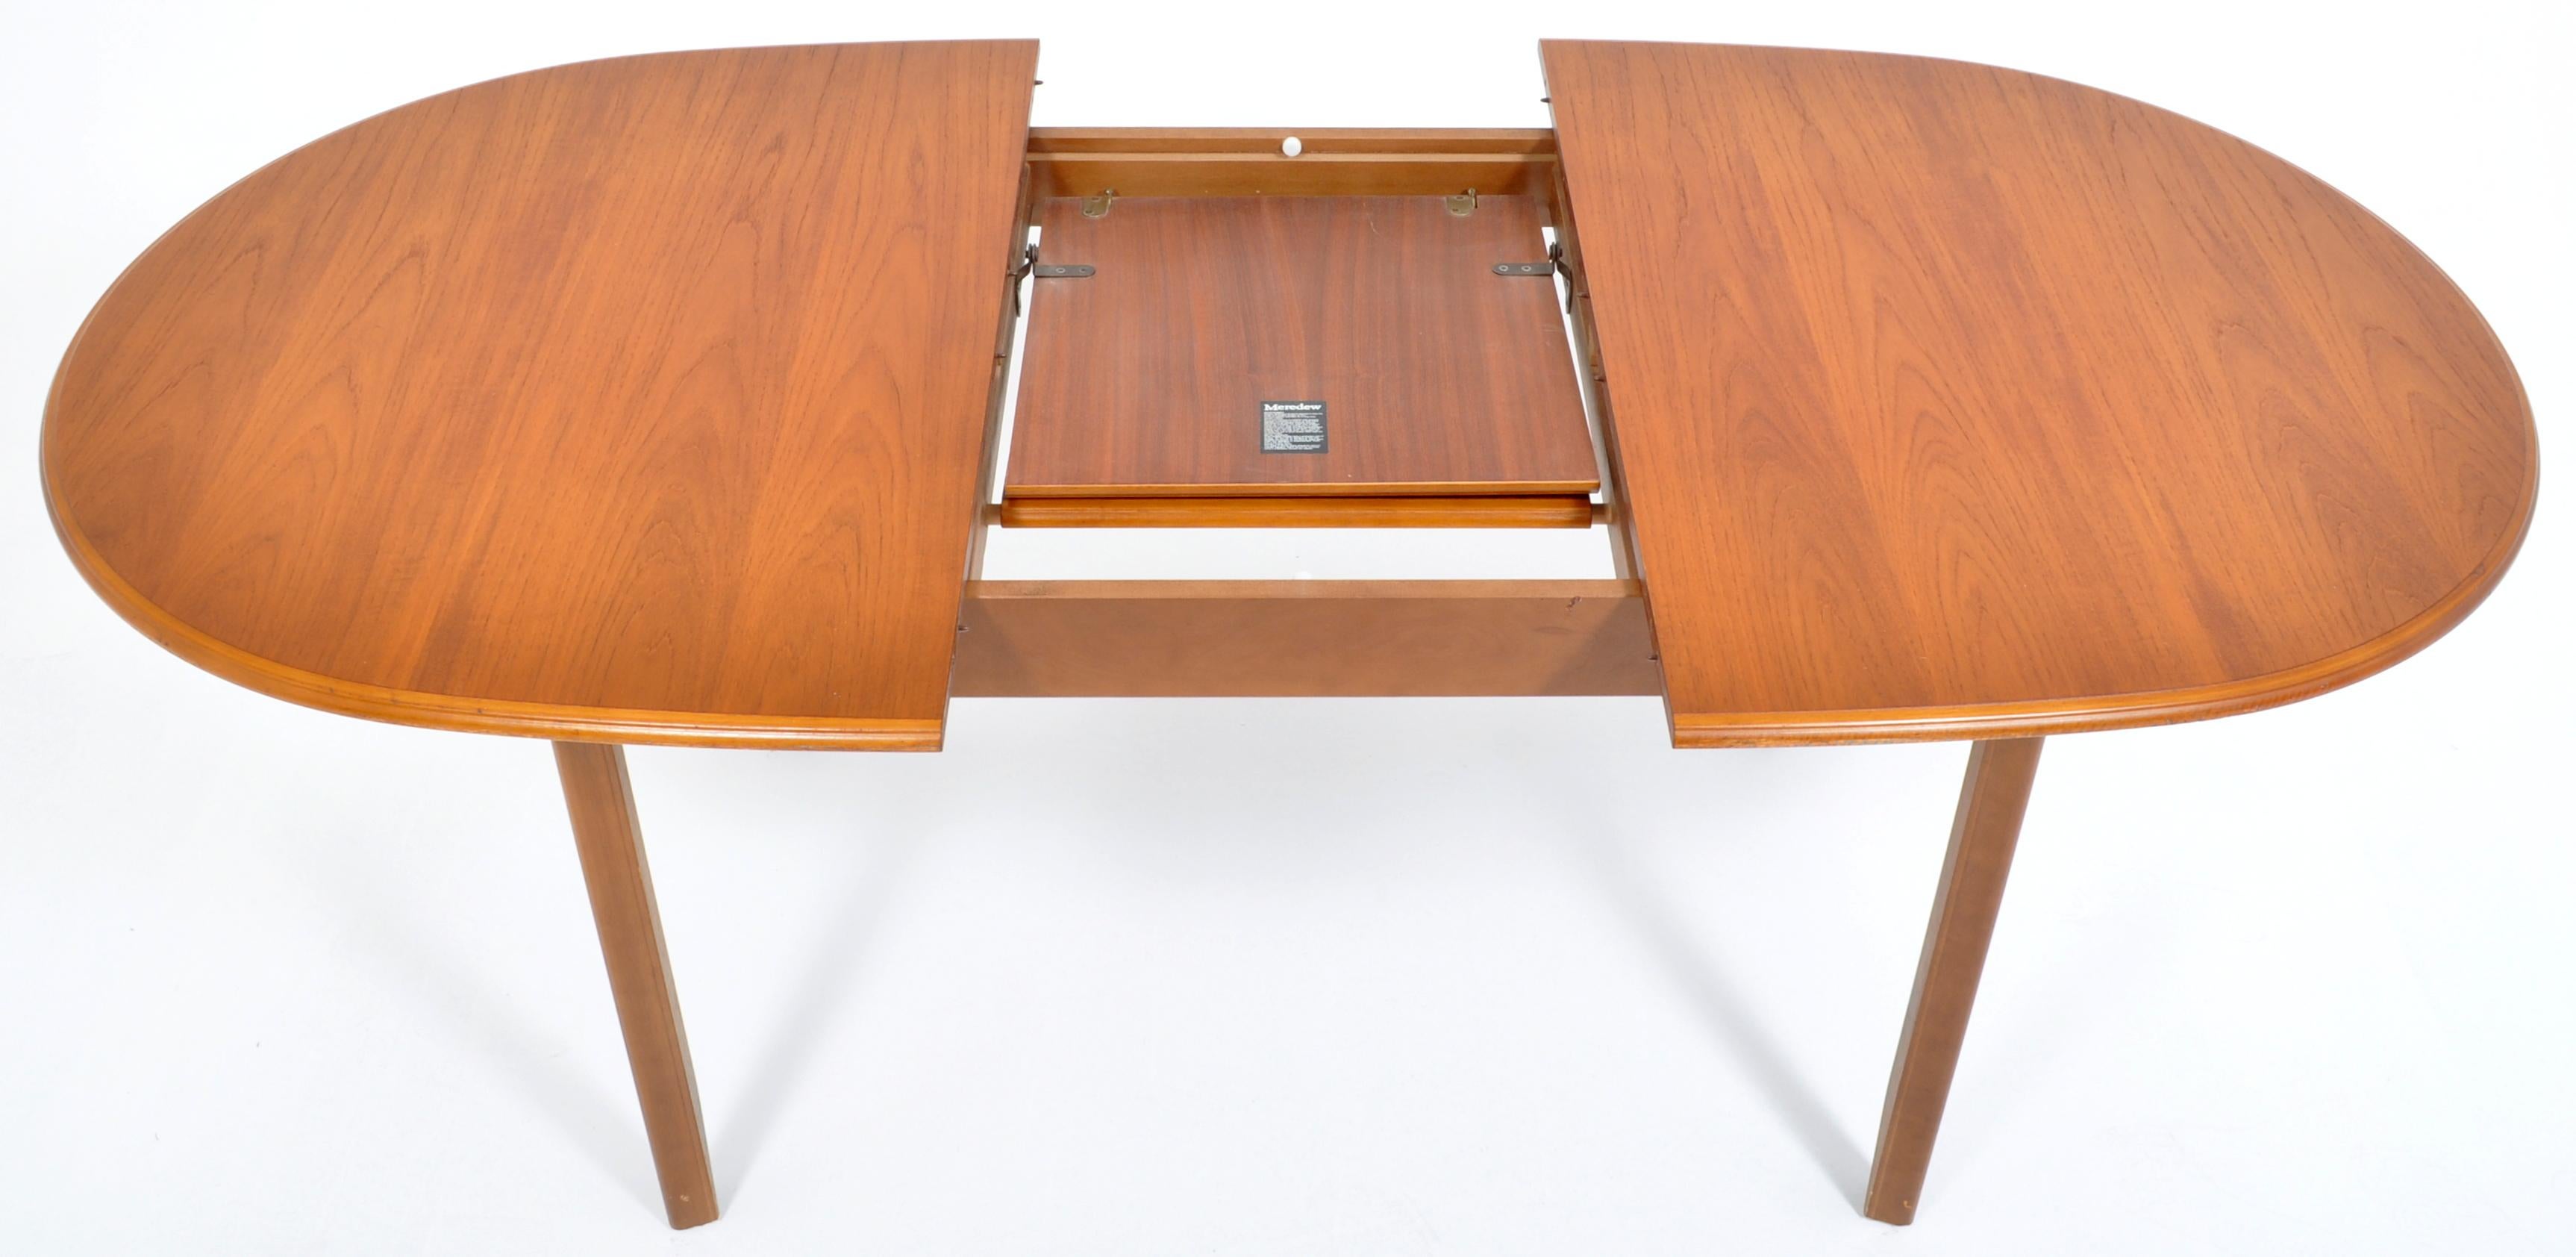 English Mid-Century Modern Teak Dining Table by Meredew, 1960s